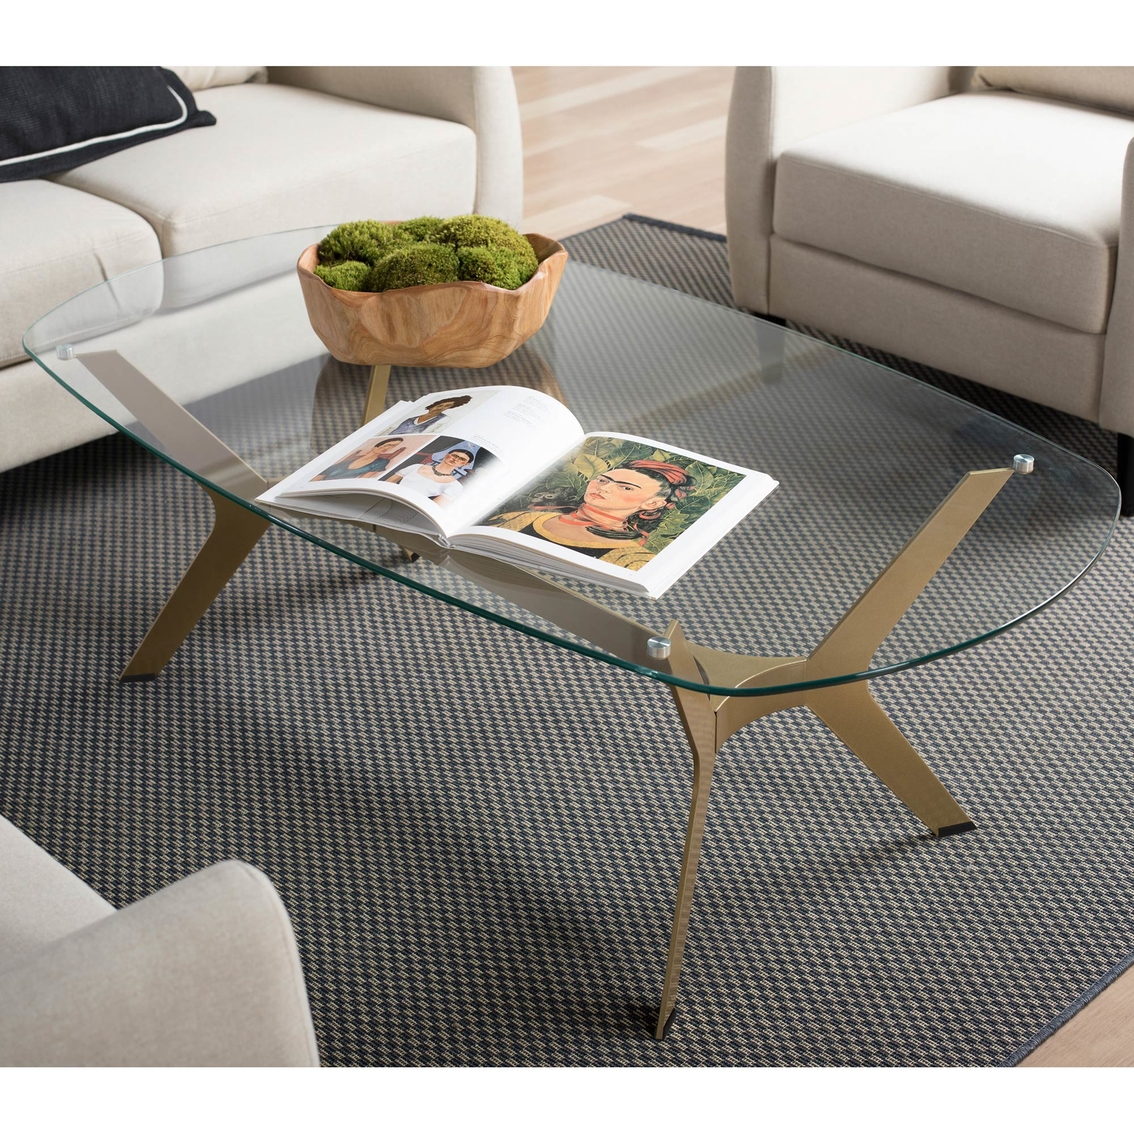 Studio Designs Home Archtech Modern Coffee Table - Image 4 of 4